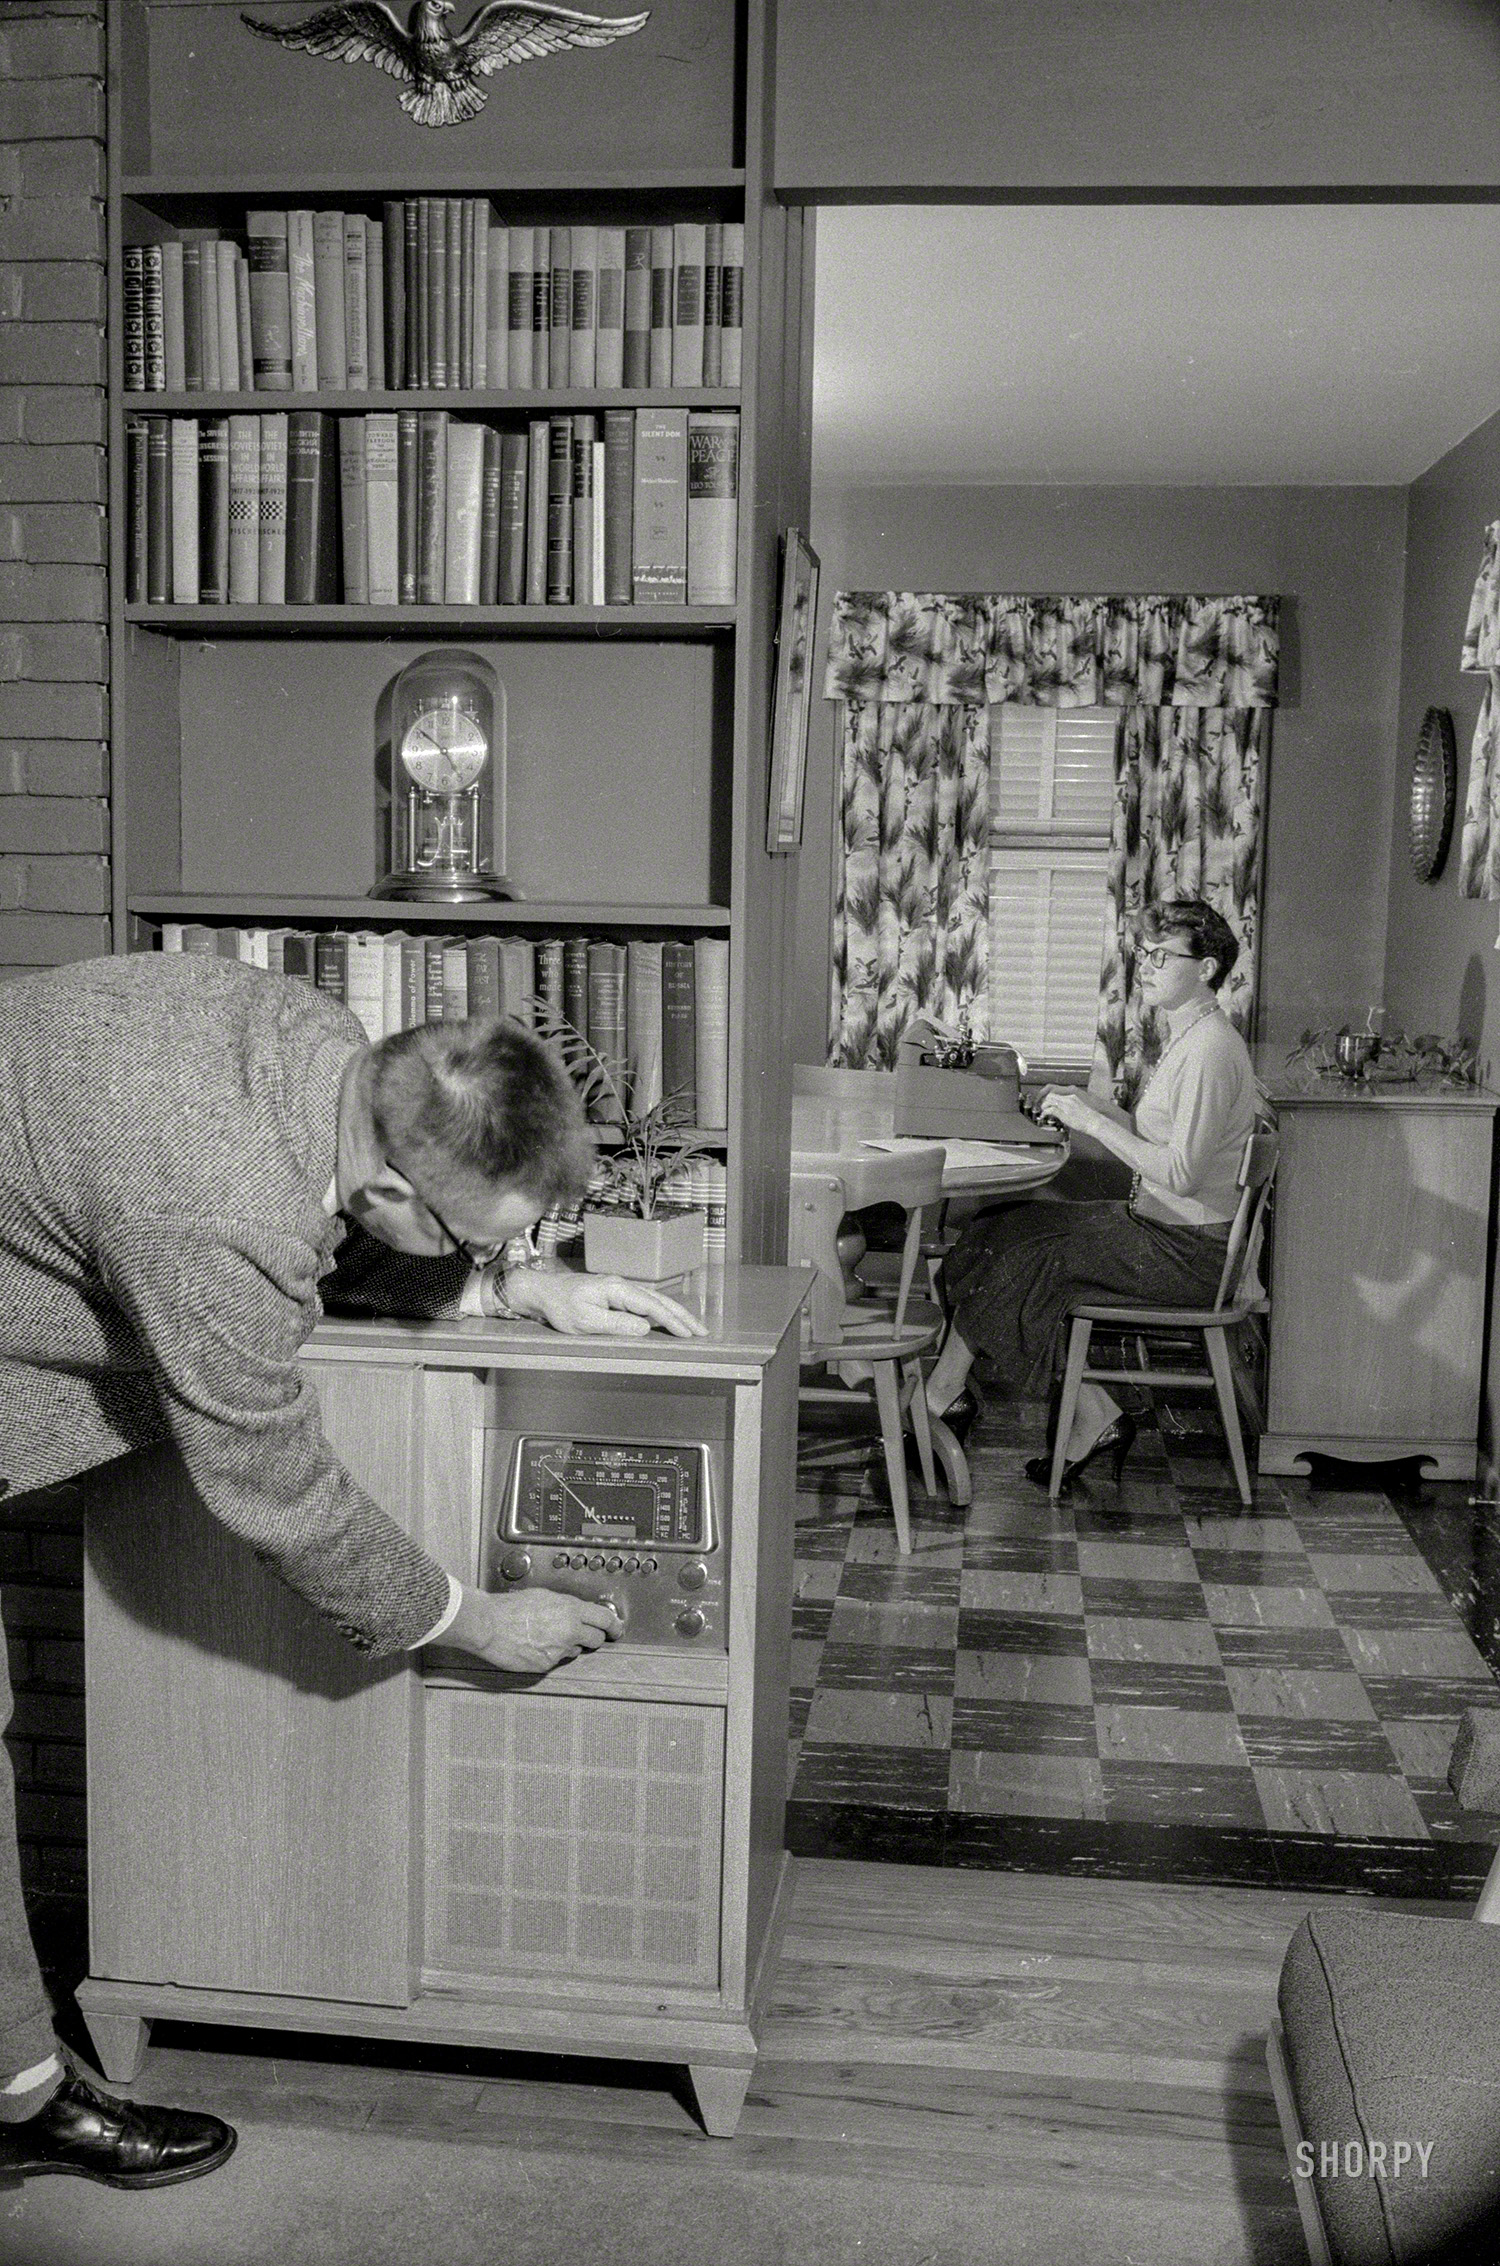 &nbsp; &nbsp; &nbsp; &nbsp; "Dick turned the volume up to 11 to drown out the sound of Mary's infernal pecking, while silently she plotted her revenge. Well, not really silently -- Mary was typing her plan at the kitchen table."
December 1957. Washington, D.C. "Man tuning console radio while woman in next room types." 35mm negative from the News Photo Archive. View full size.